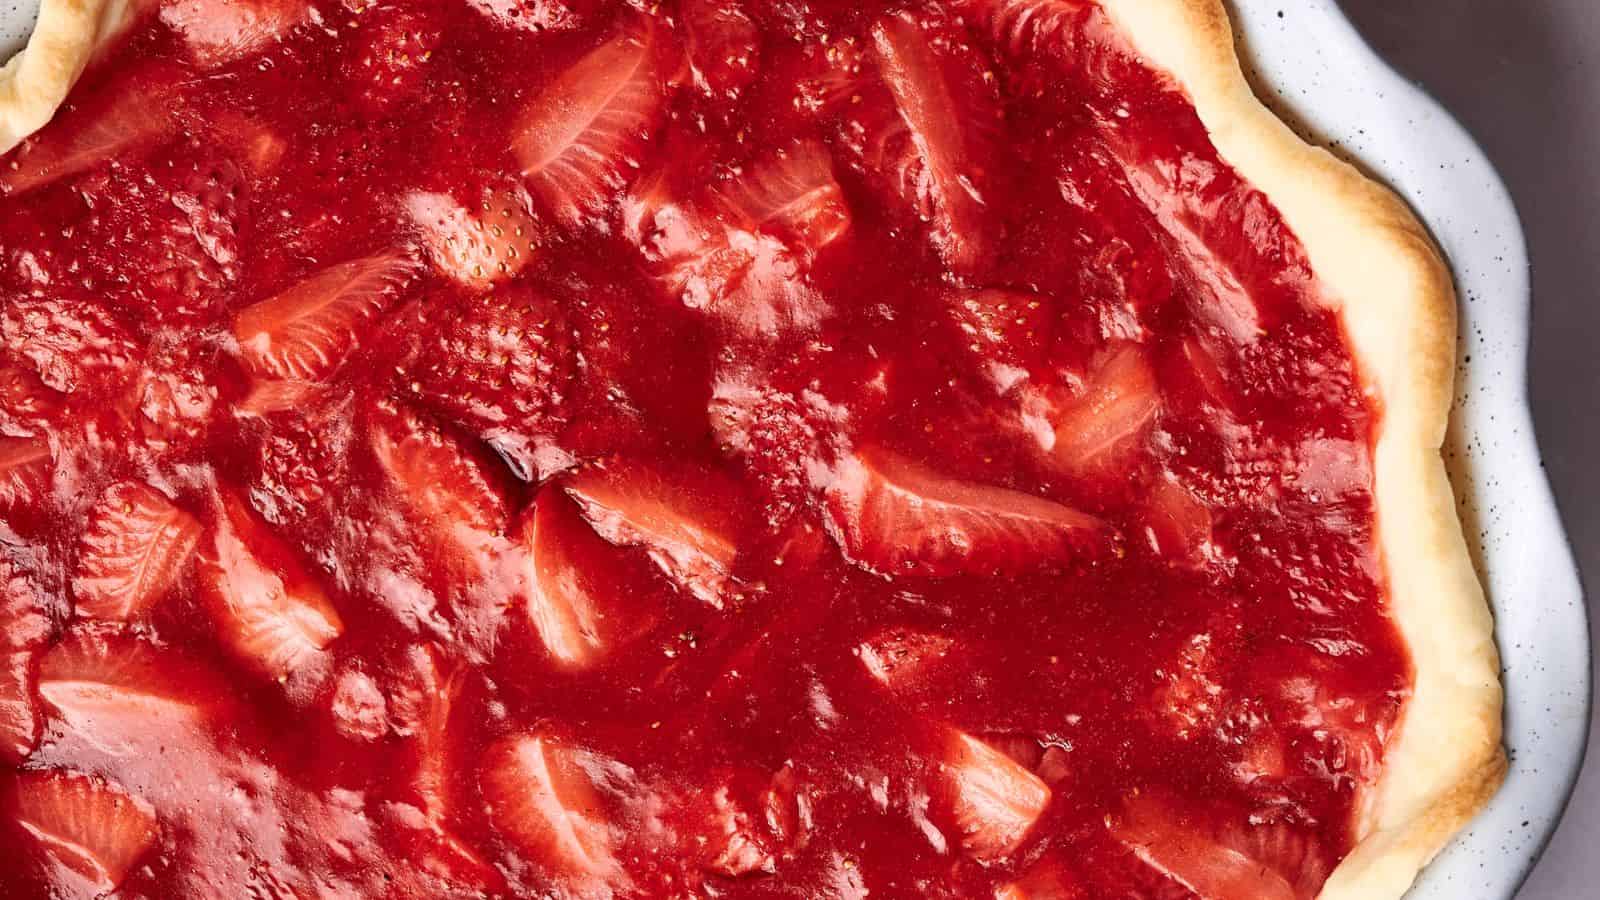 Close-up of a strawberry pizza featuring a thin crust topped with a layer of strawberry sauce and sliced strawberries, evoking the flavorful appearance of a strawberry pie with its vibrant red color.